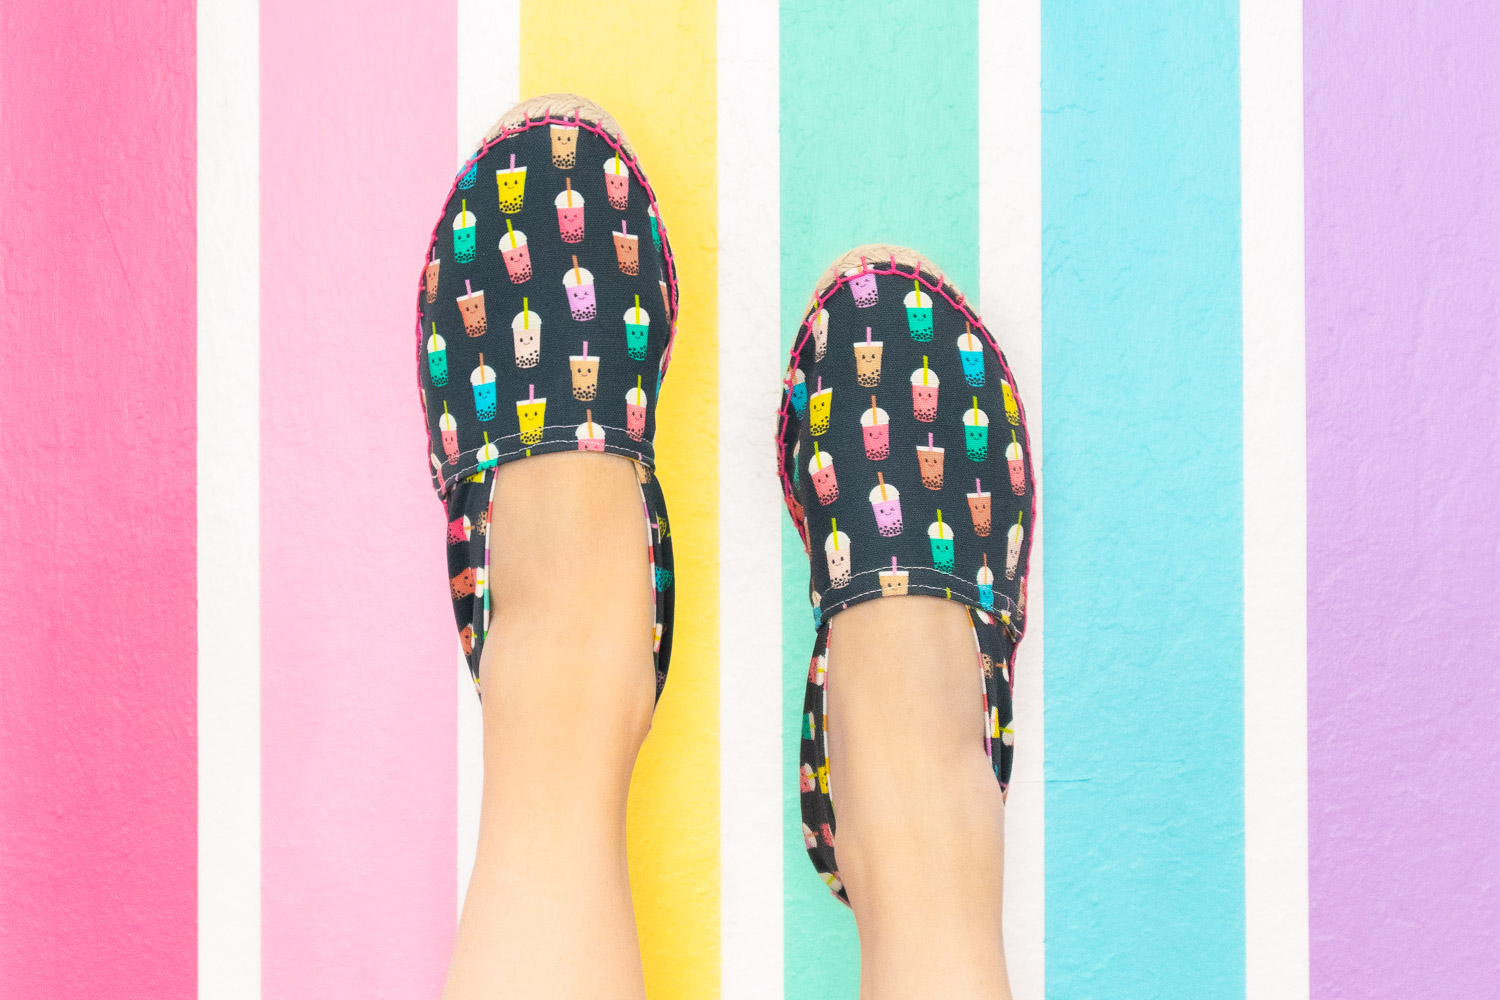 Espadrille shoes with navy background and colorful bubble tea print. They are worn by Blaire, the creator of Freshly Fuji and photographed on a pastel rainbow wall.